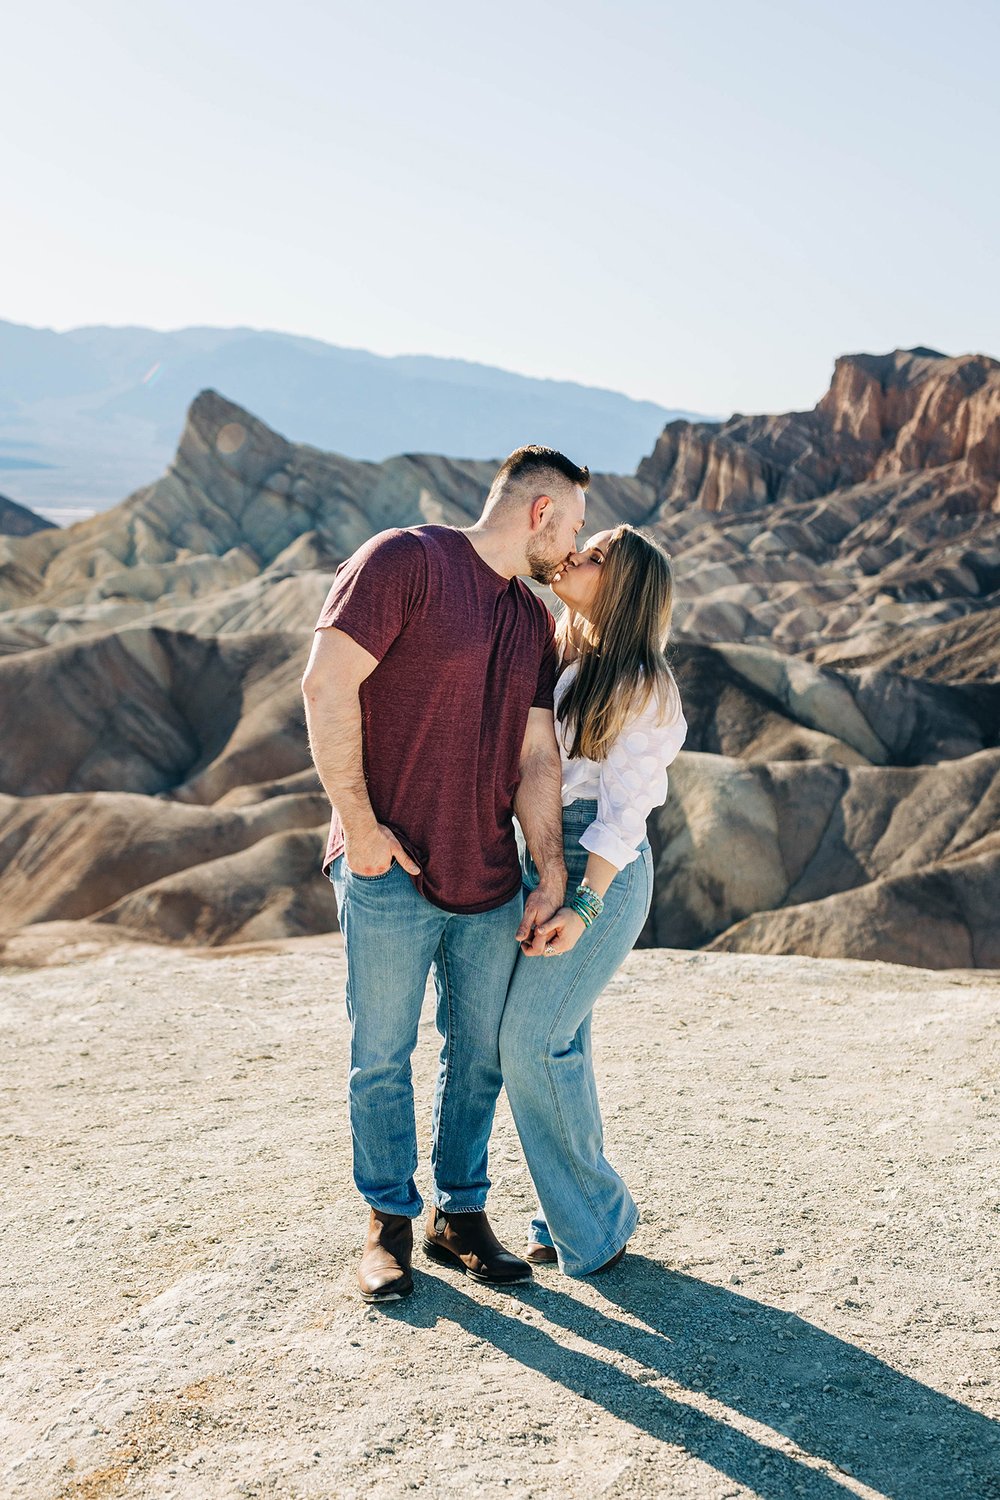 Aly and Alex kiss in front of a desert mountain view in Death Valley National Park.